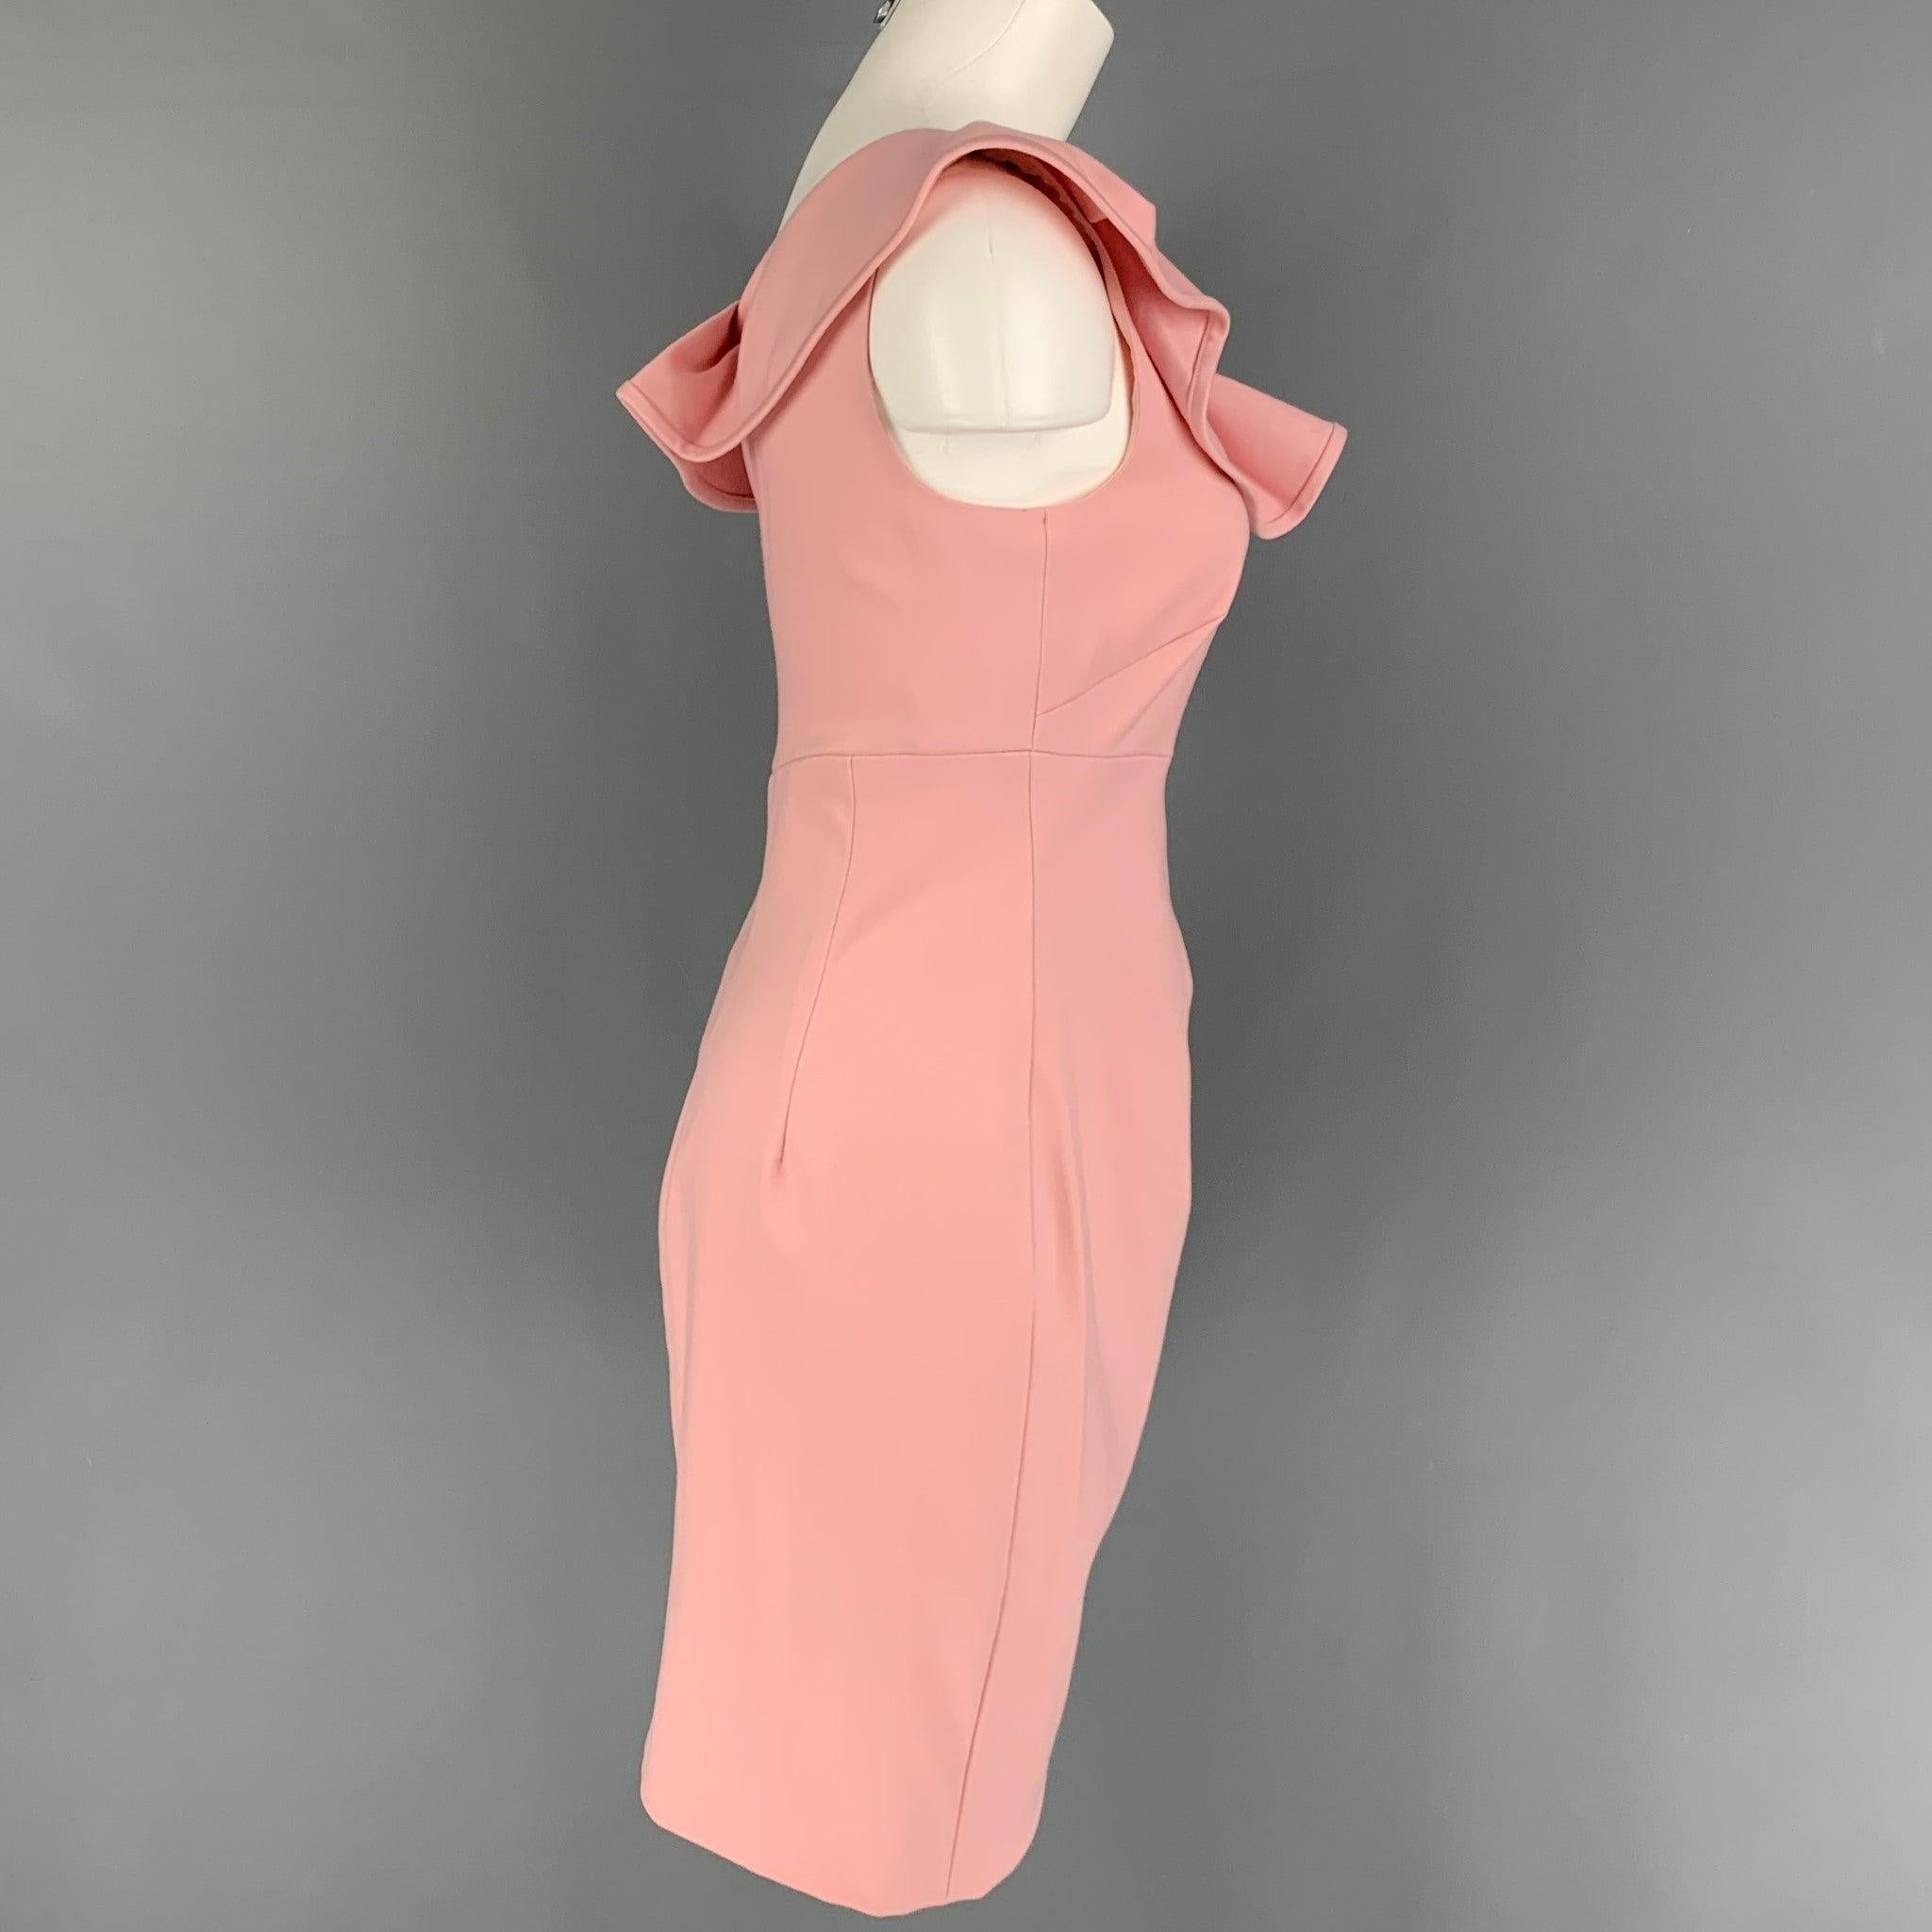 VALENTINO cocktail dress comes in a blush pink wool featuring a one shoulder design, ruffled detail, front side slit, and a side zipper closure. Made in Italy.
Very Good
Pre-Owned Condition. 

Marked:   6 

Measurements: 
  Bust: 28 inches  Waist: